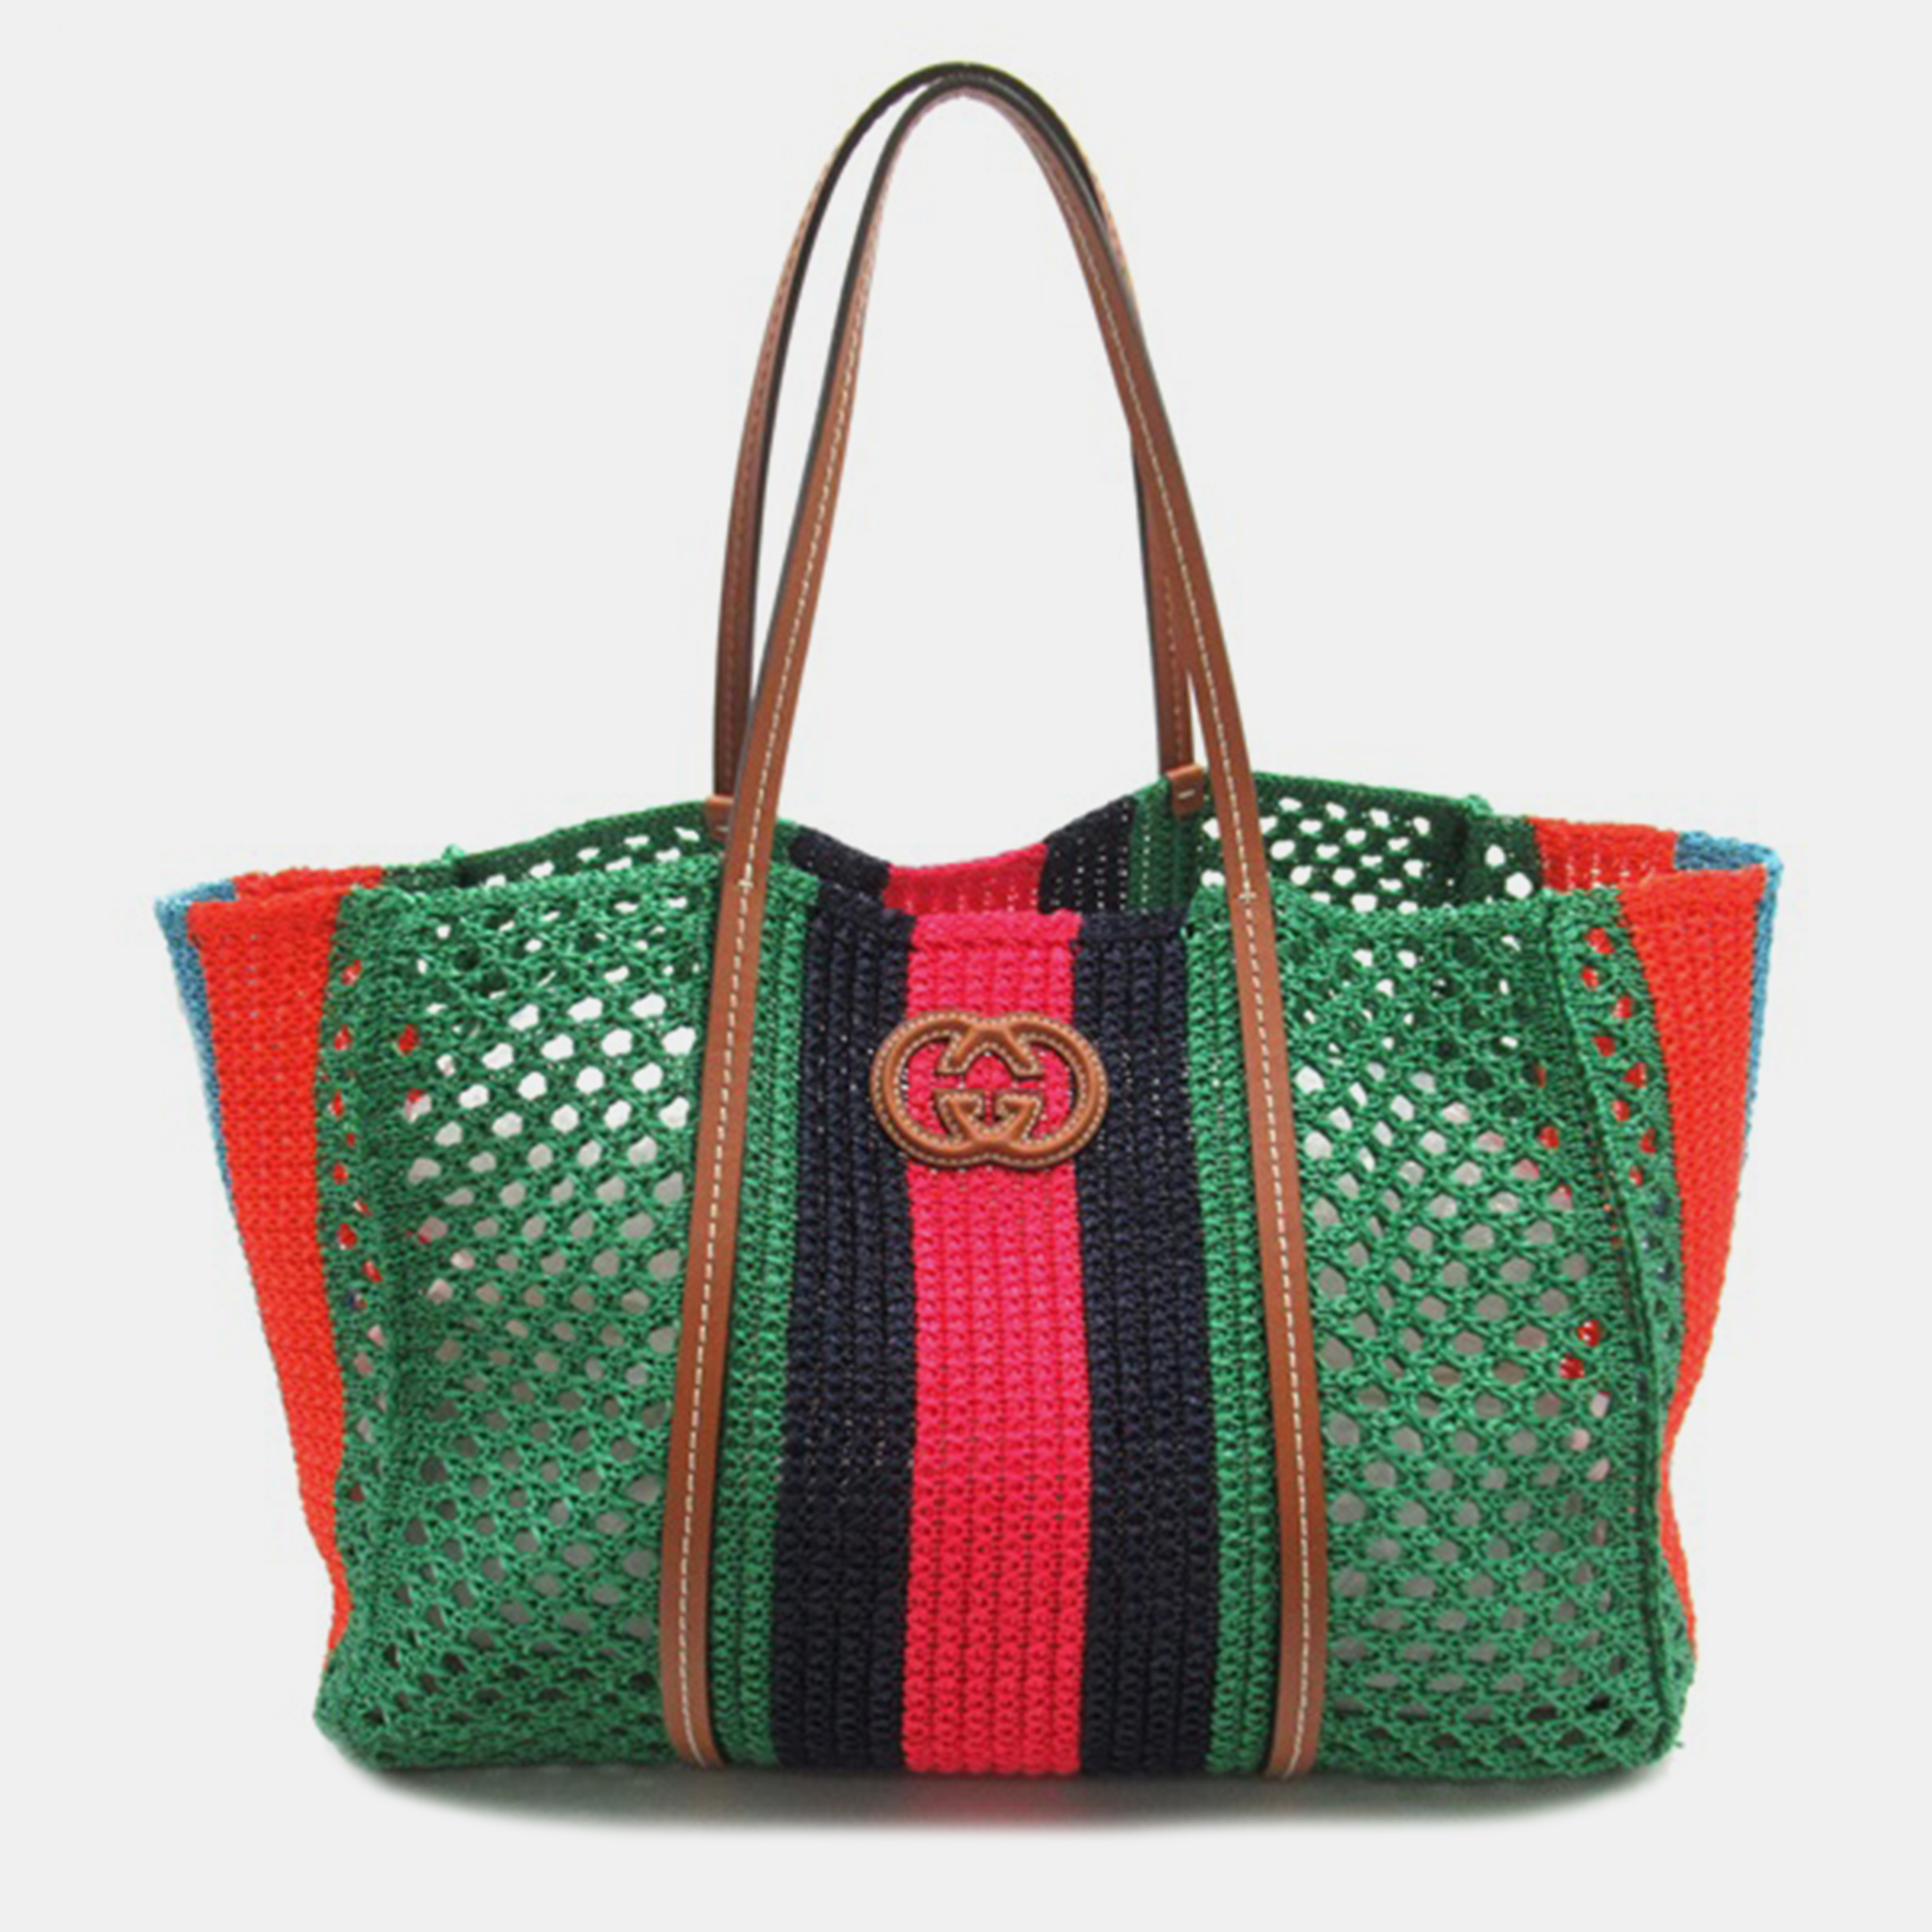 Gucci green others woven interlocking g tote bag